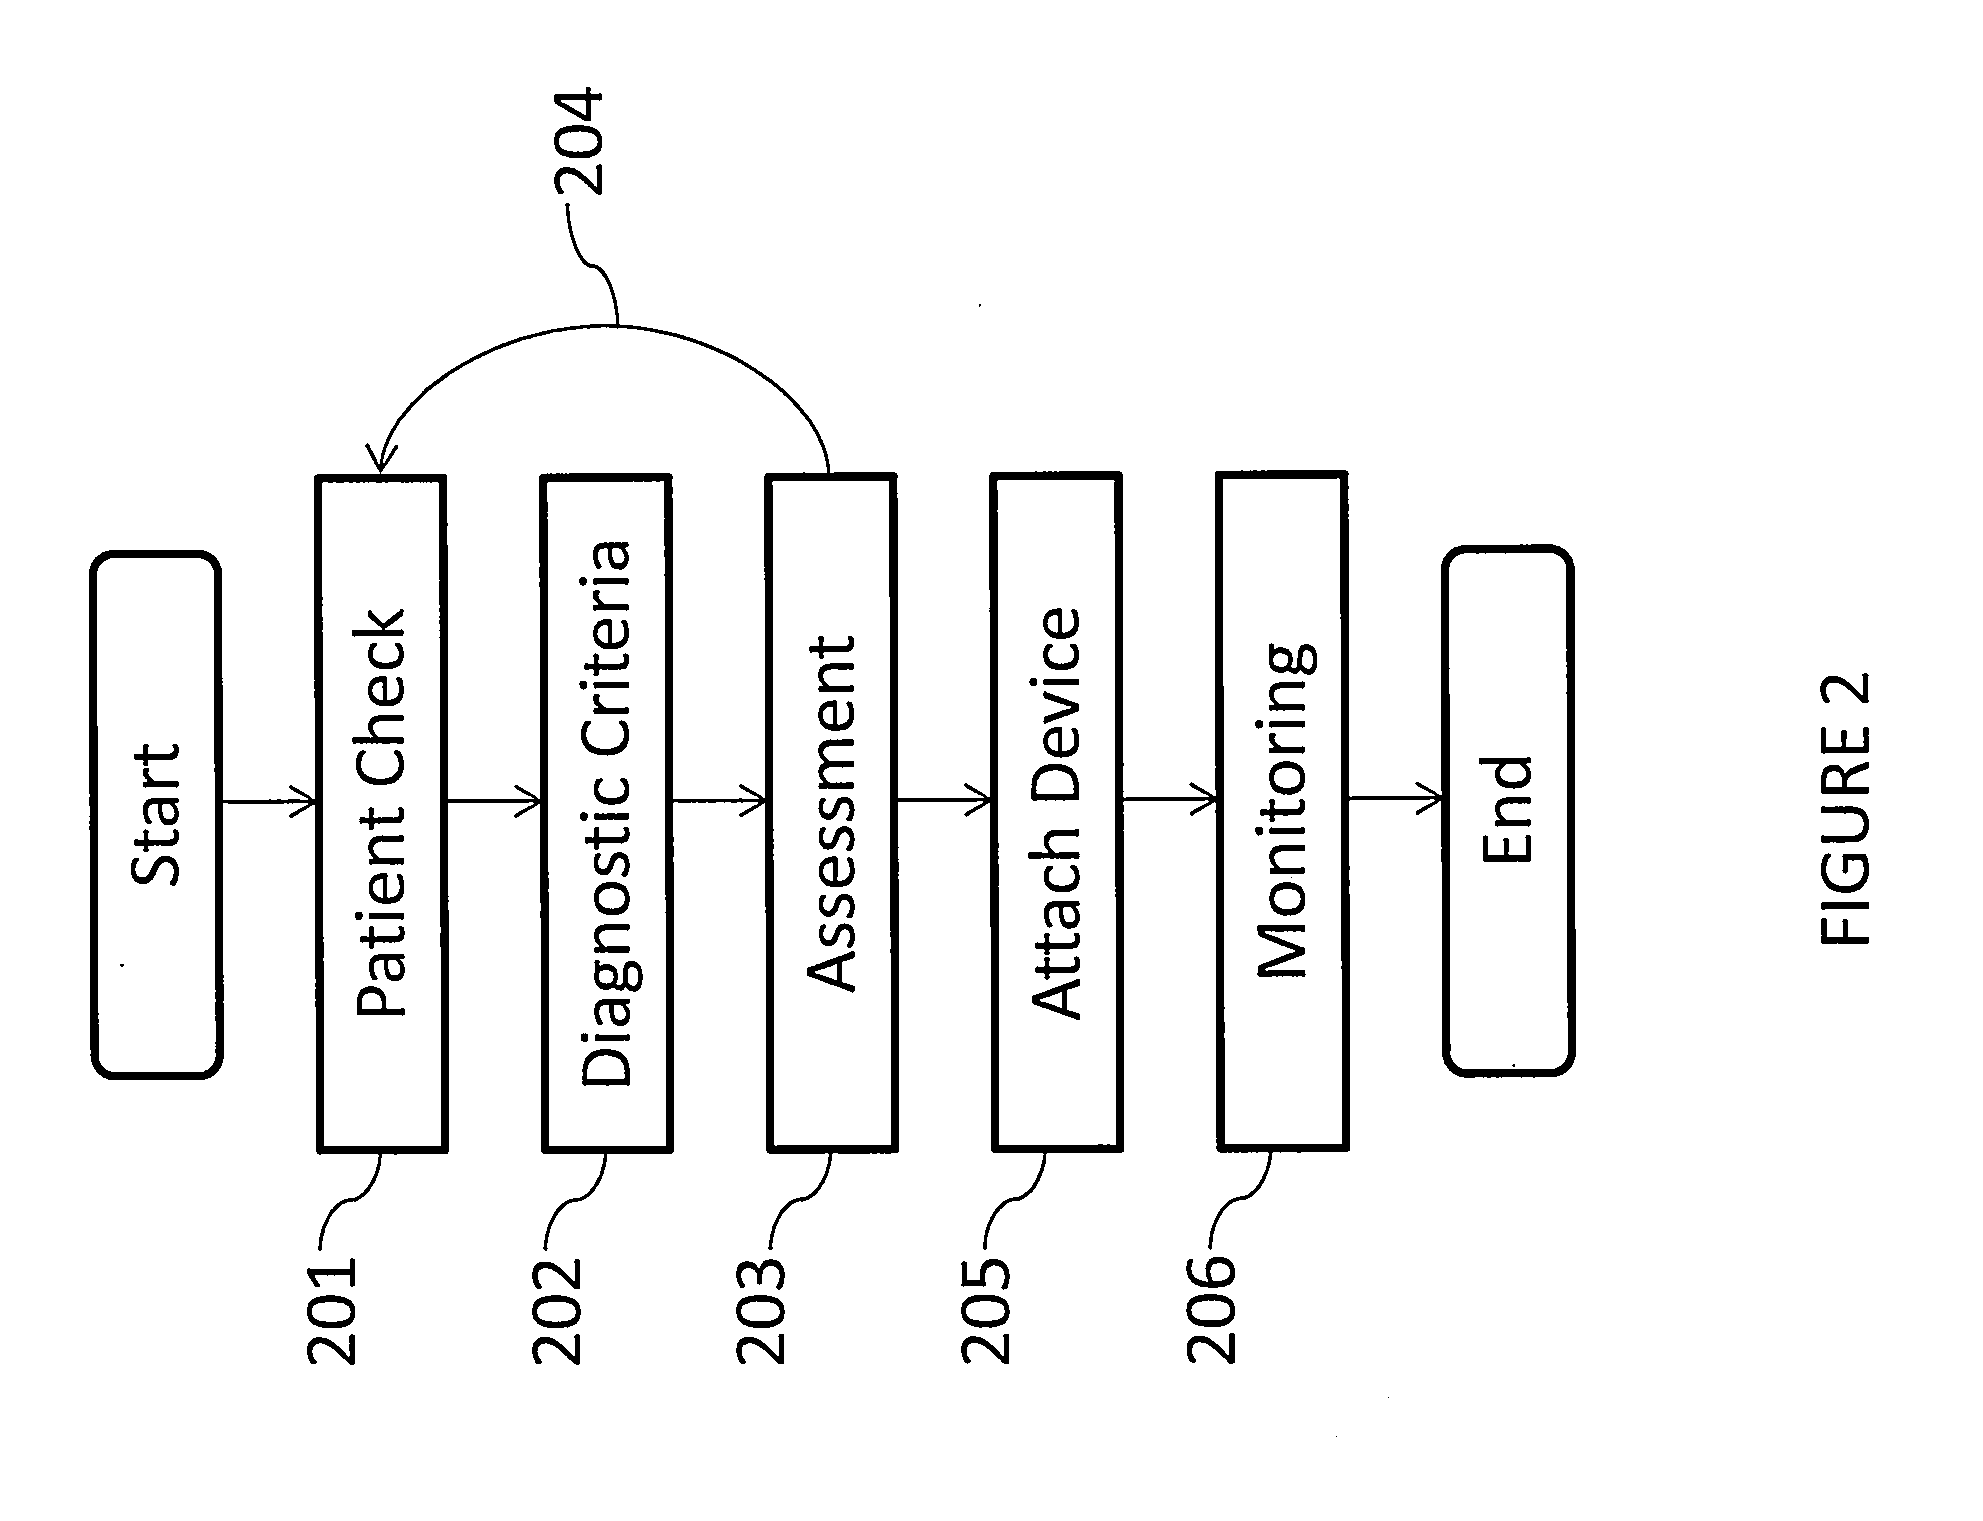 Accelerometer and wireless notification system